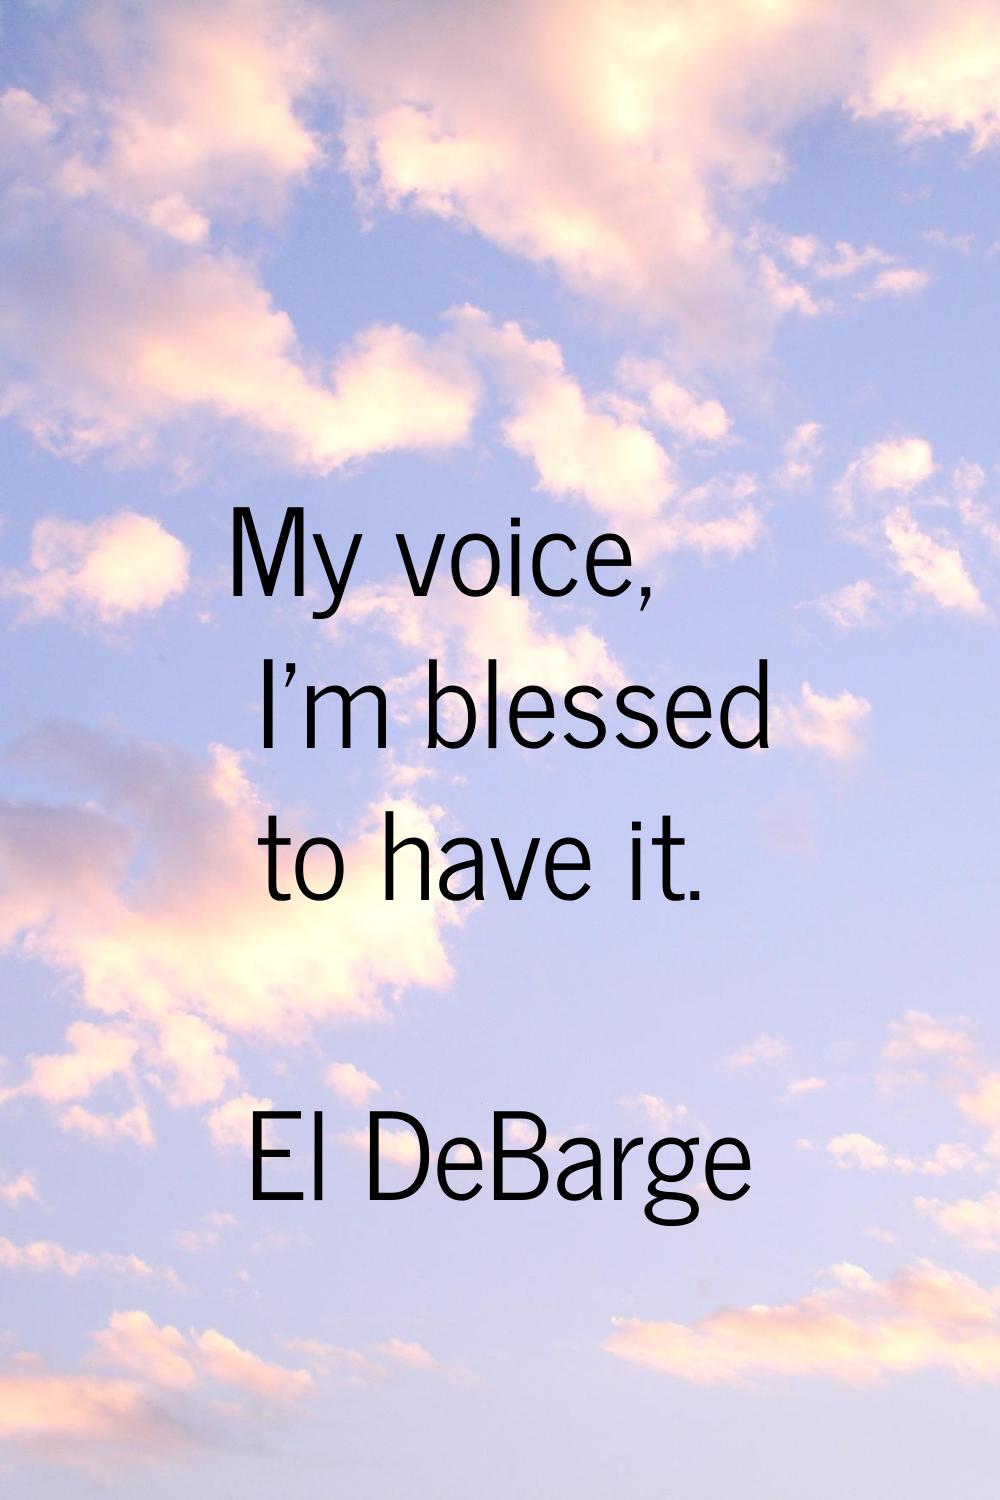 My voice, I'm blessed to have it.